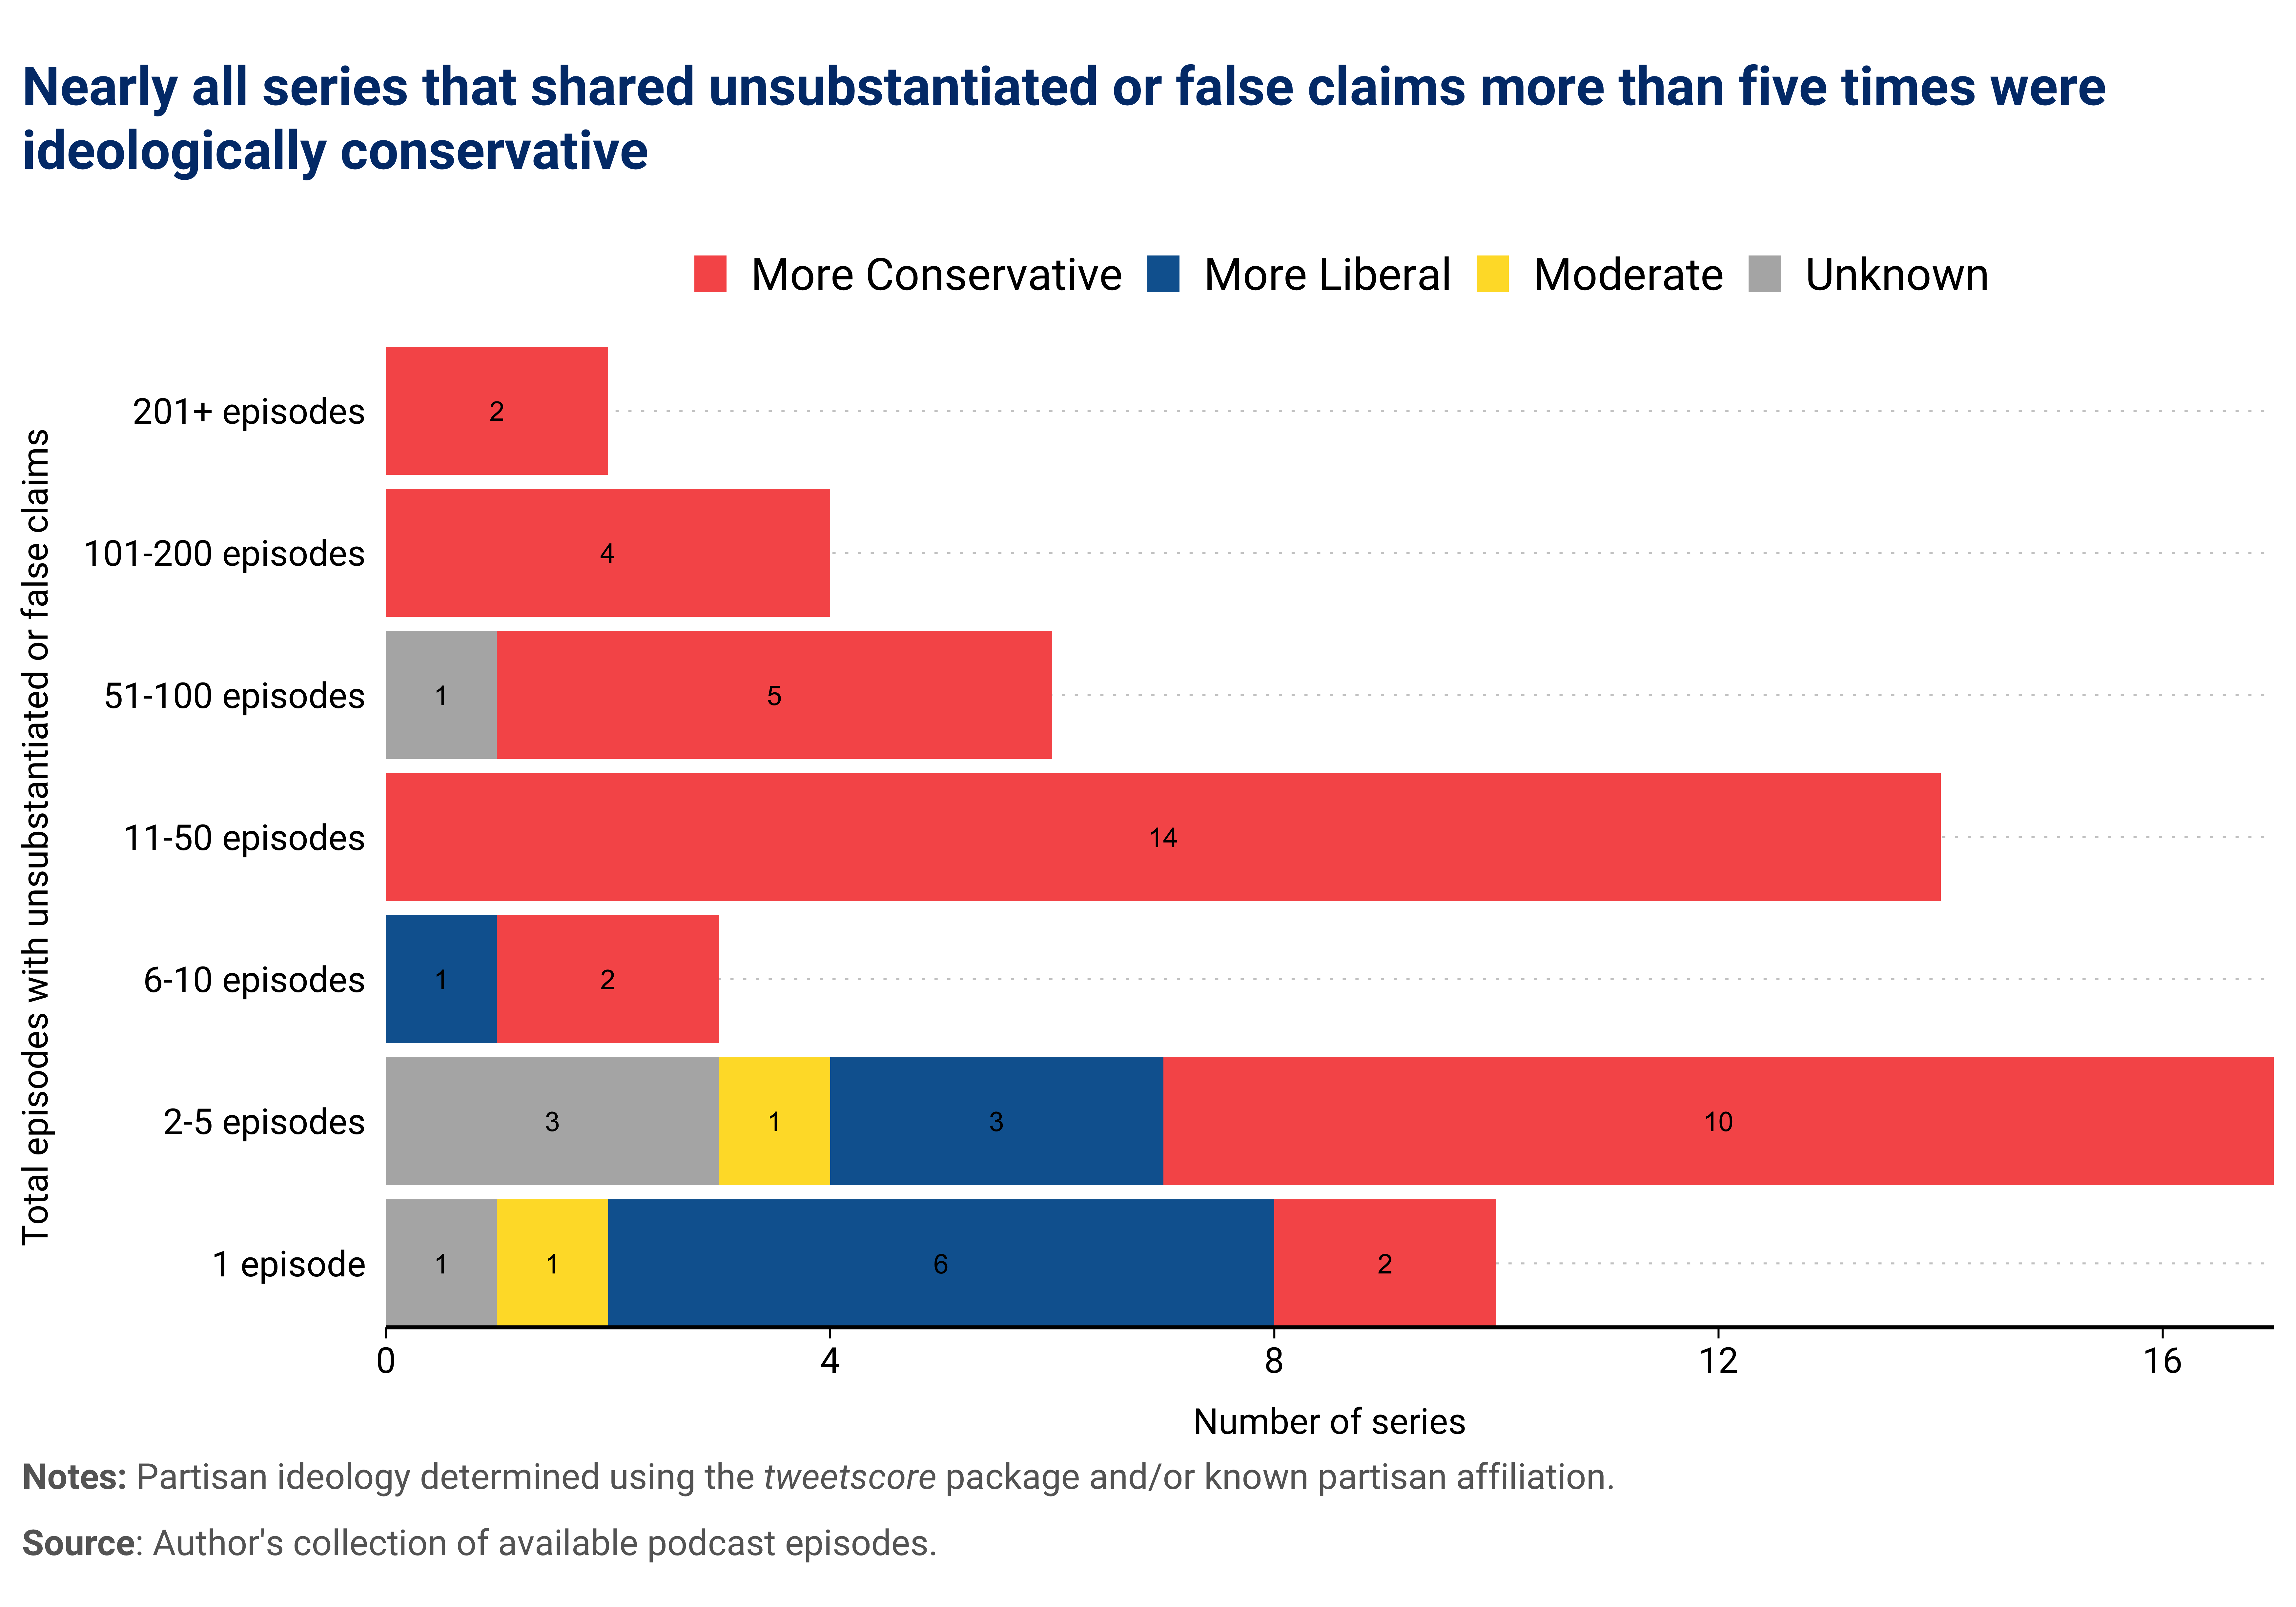 Figure: The total number of podcast series in the dataset that featured unsubstantiated or false content, broken down by the partisan leaning of the hosts. Of the series that shared five or more unsubstantiated or false claims, nearly all had hosts who were ideologically conservative. 